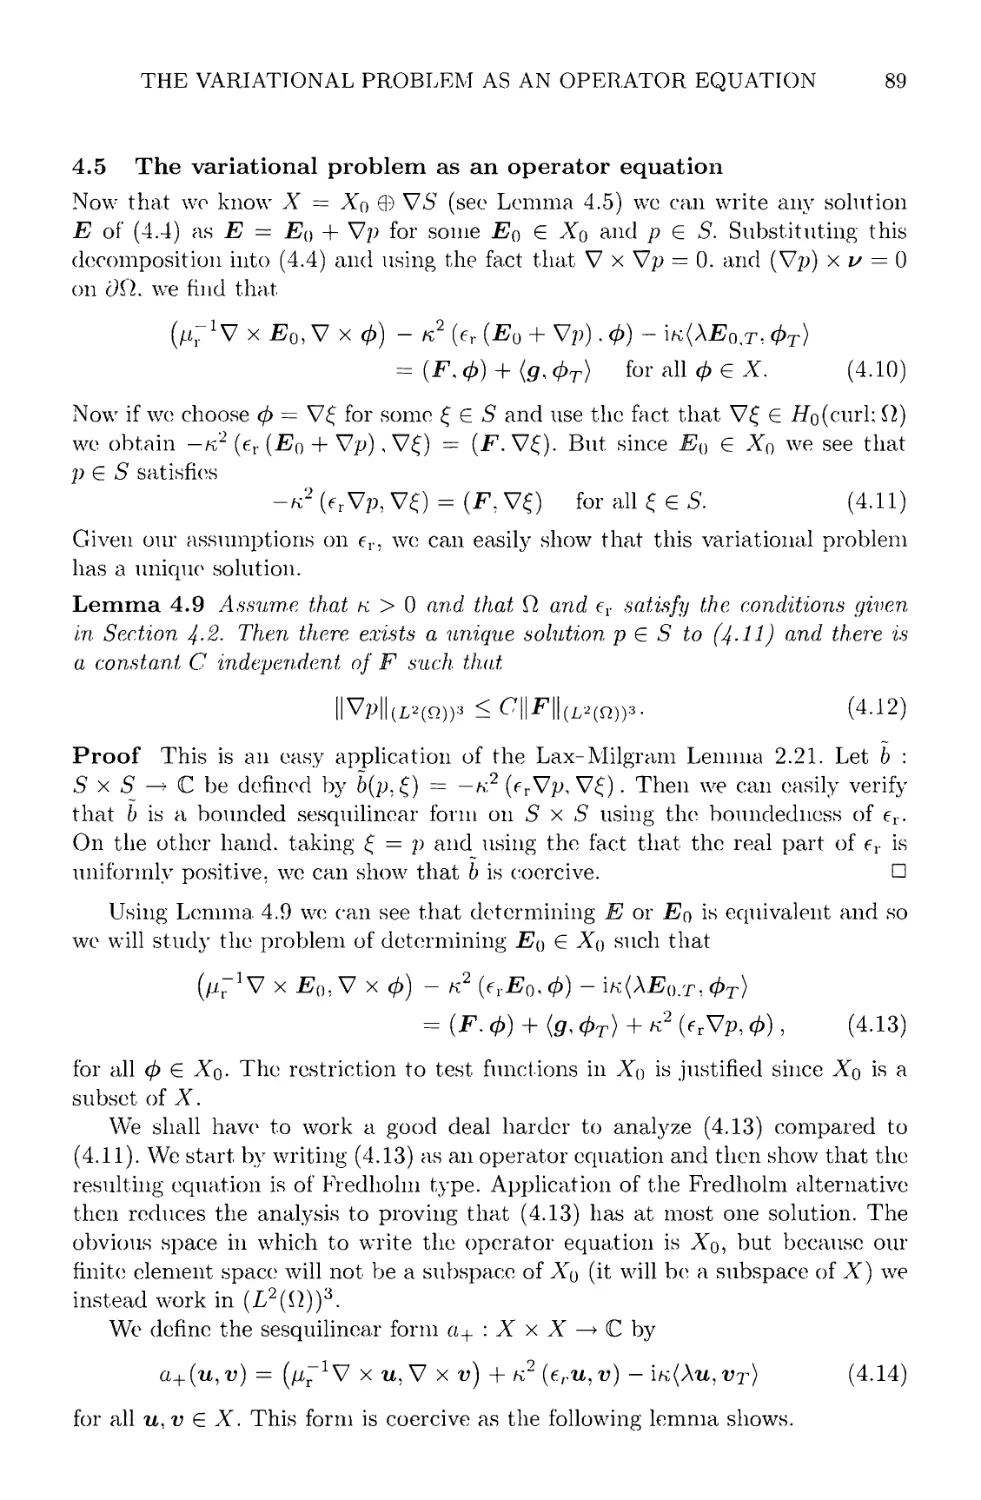 4.5 The variational problem as an operator equation